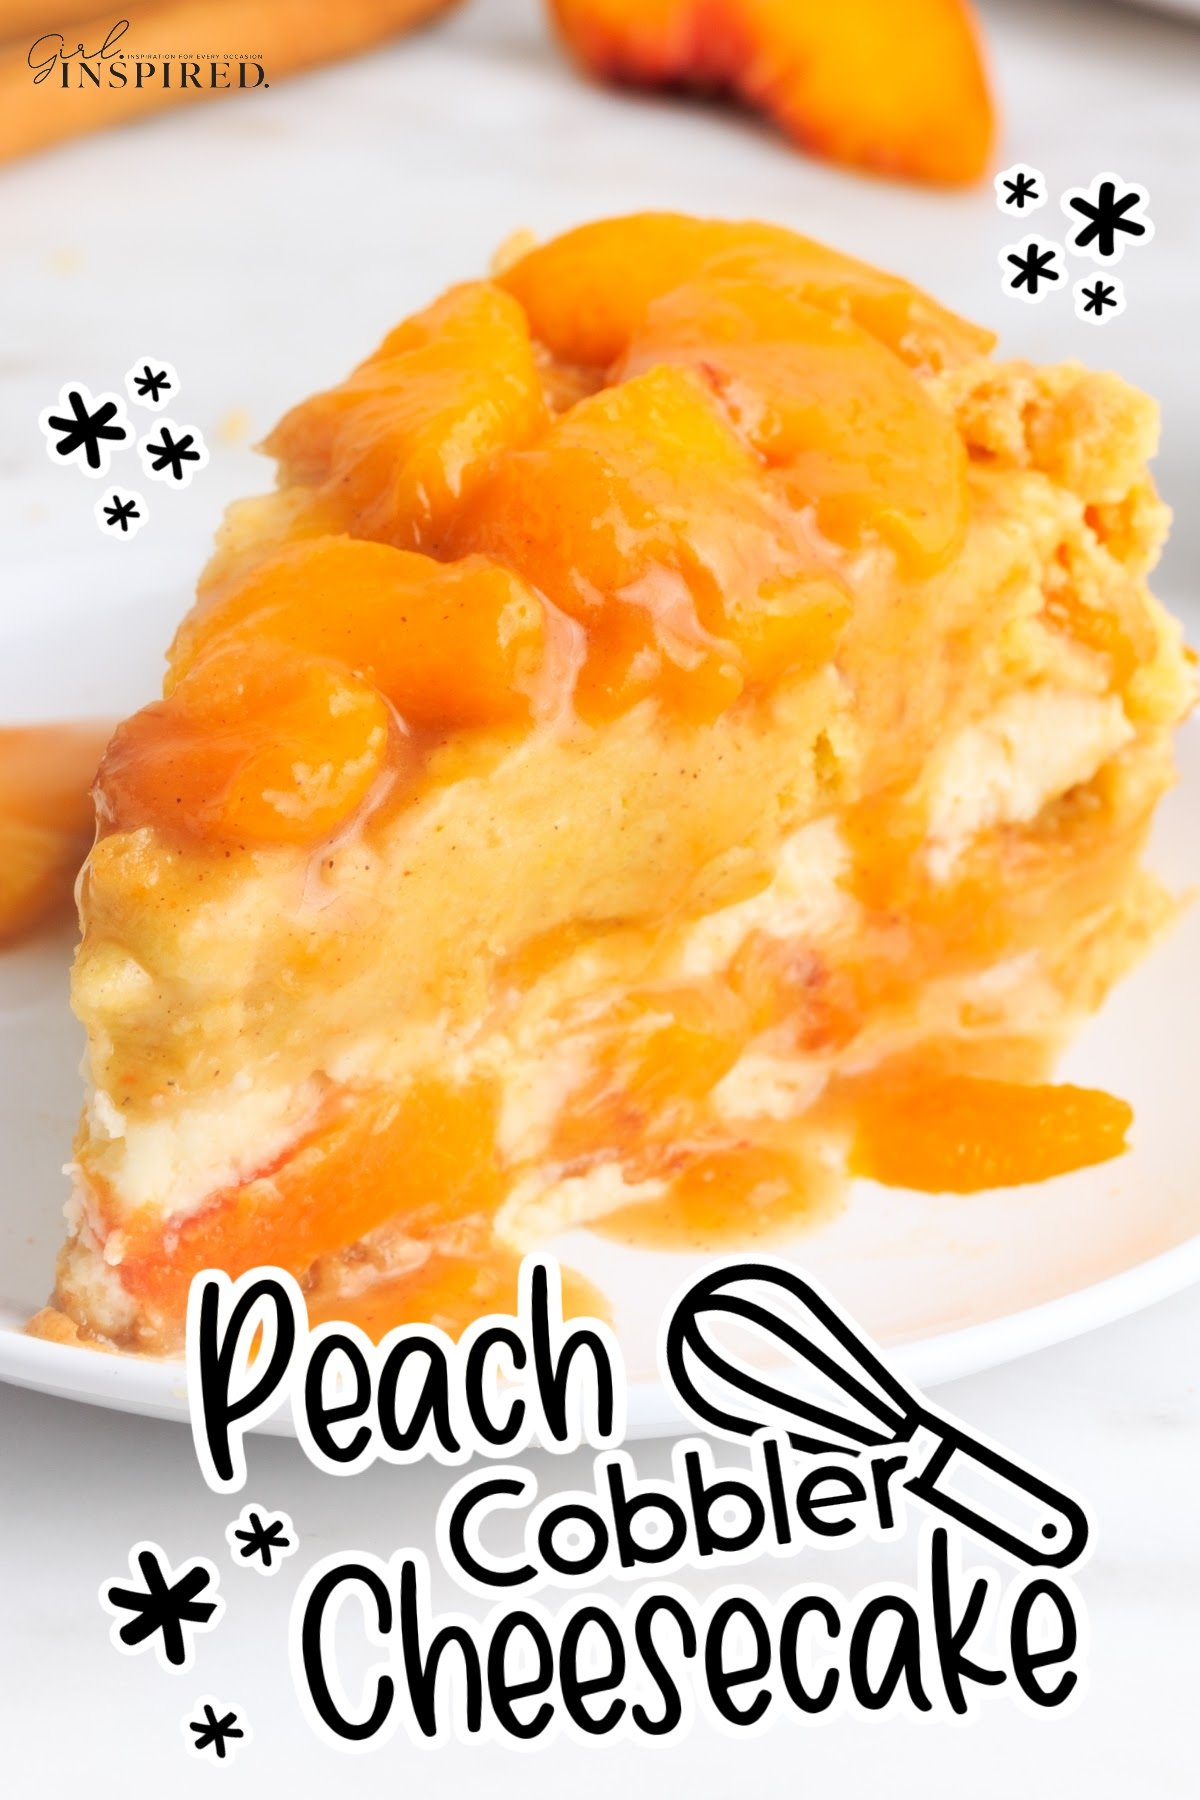 A slice of Peach Cobbler Cheesecake on a plate with text overlay.